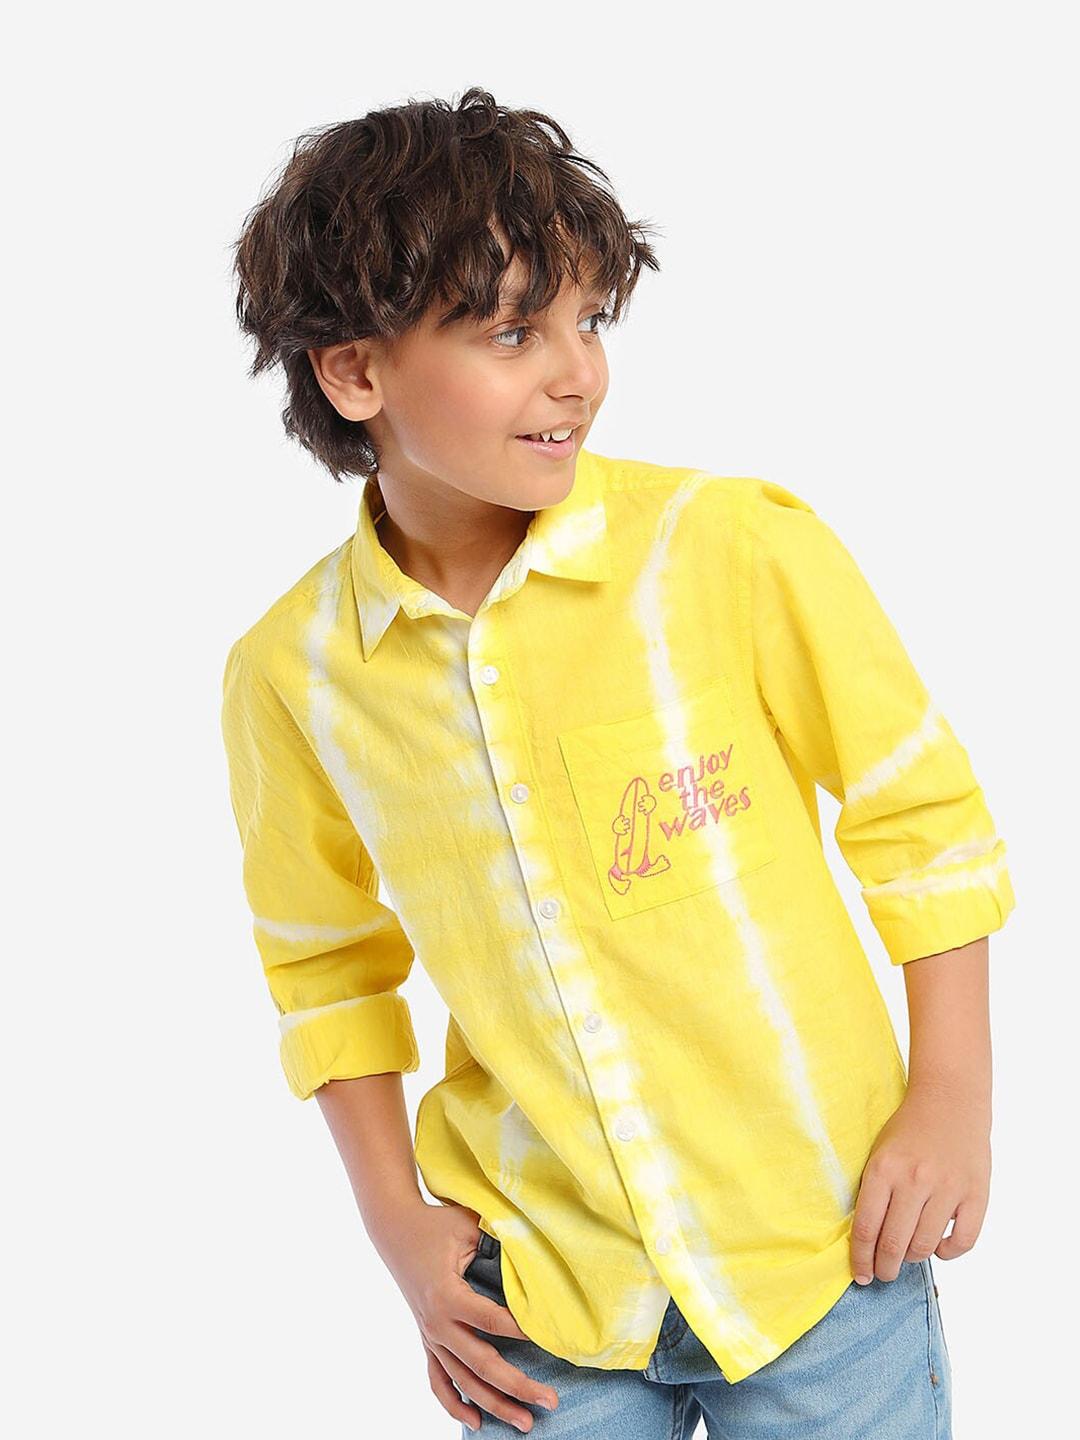 BONKIDS Boys Standard Abstract Printed Cotton Casual Shirt